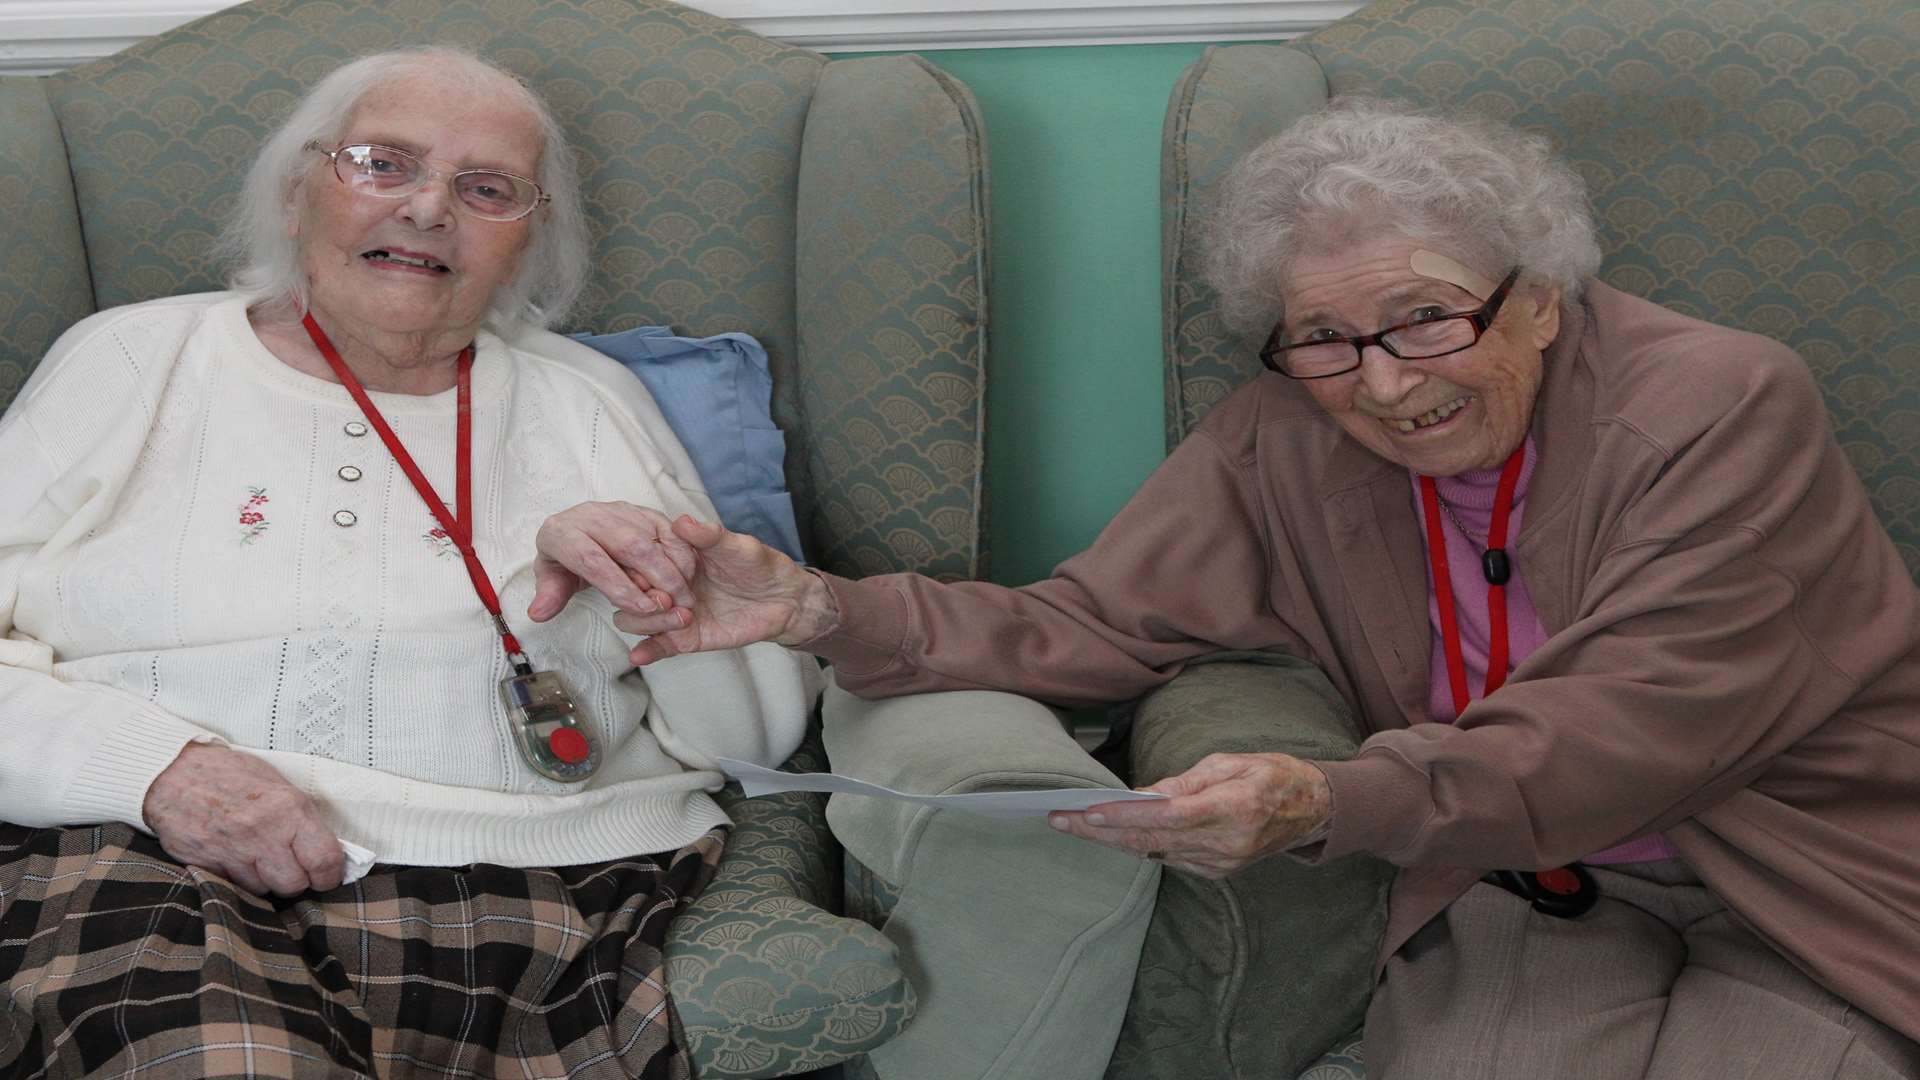 From left to right, Beryl Goodburn, 95 and Peggy Rouse, 97 reunited at The Hollies (Evergreen) Residential Care Home in Gravesend.